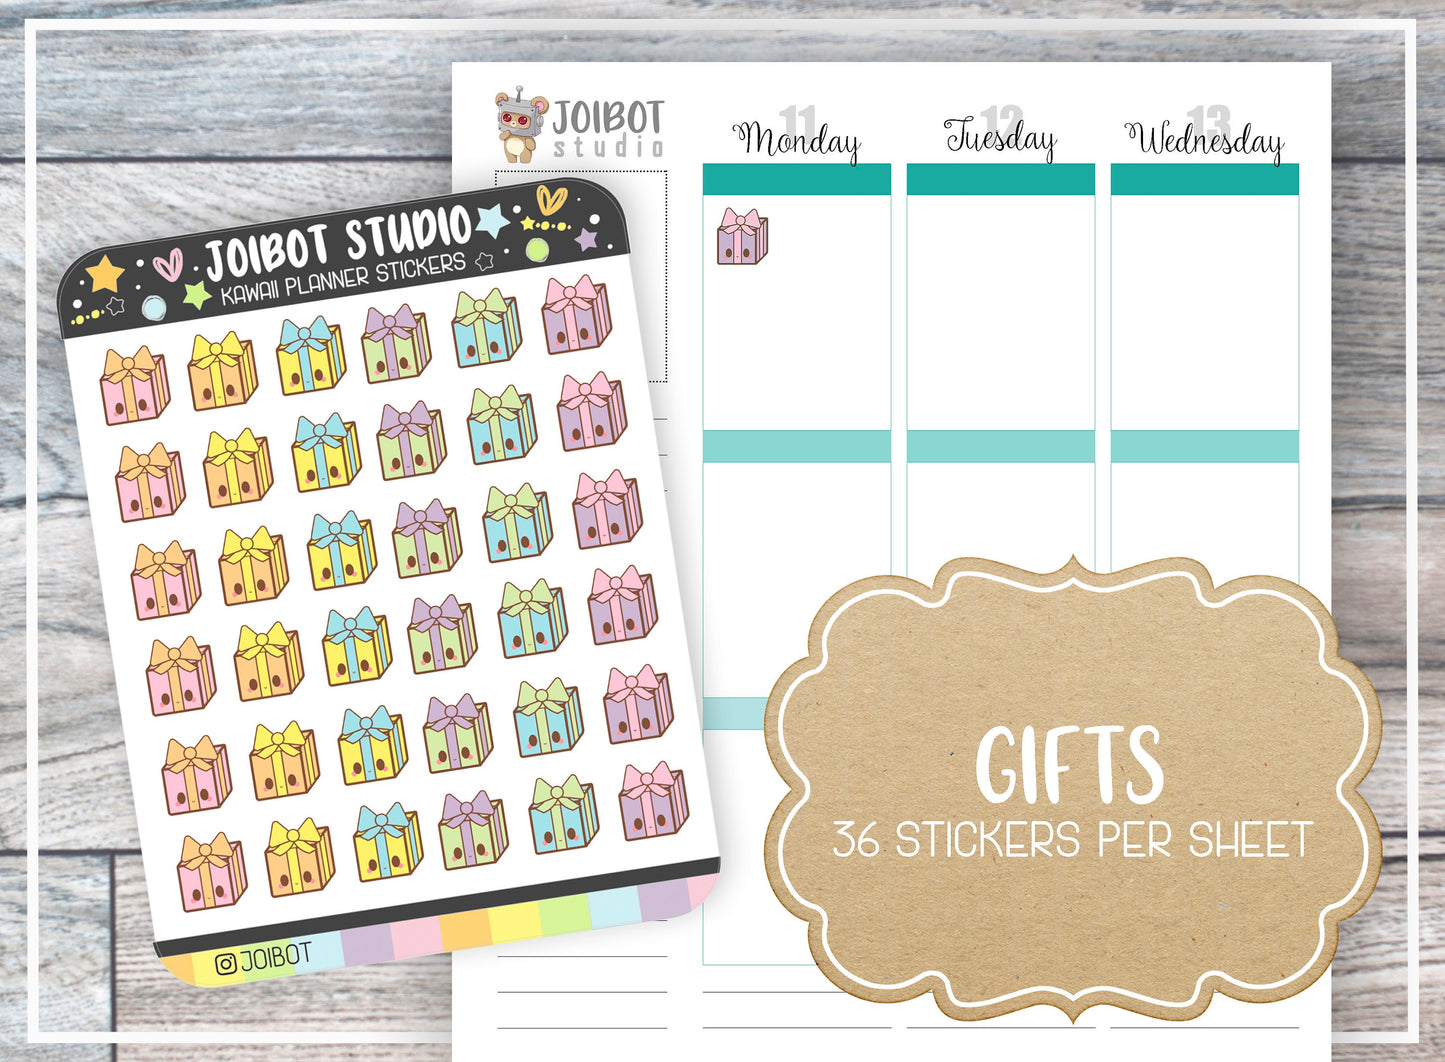 GIFTS - Kawaii Planner Stickers - Present Stickers - Journal Stickers - Cute Stickers - Decorative Stickers - K0019